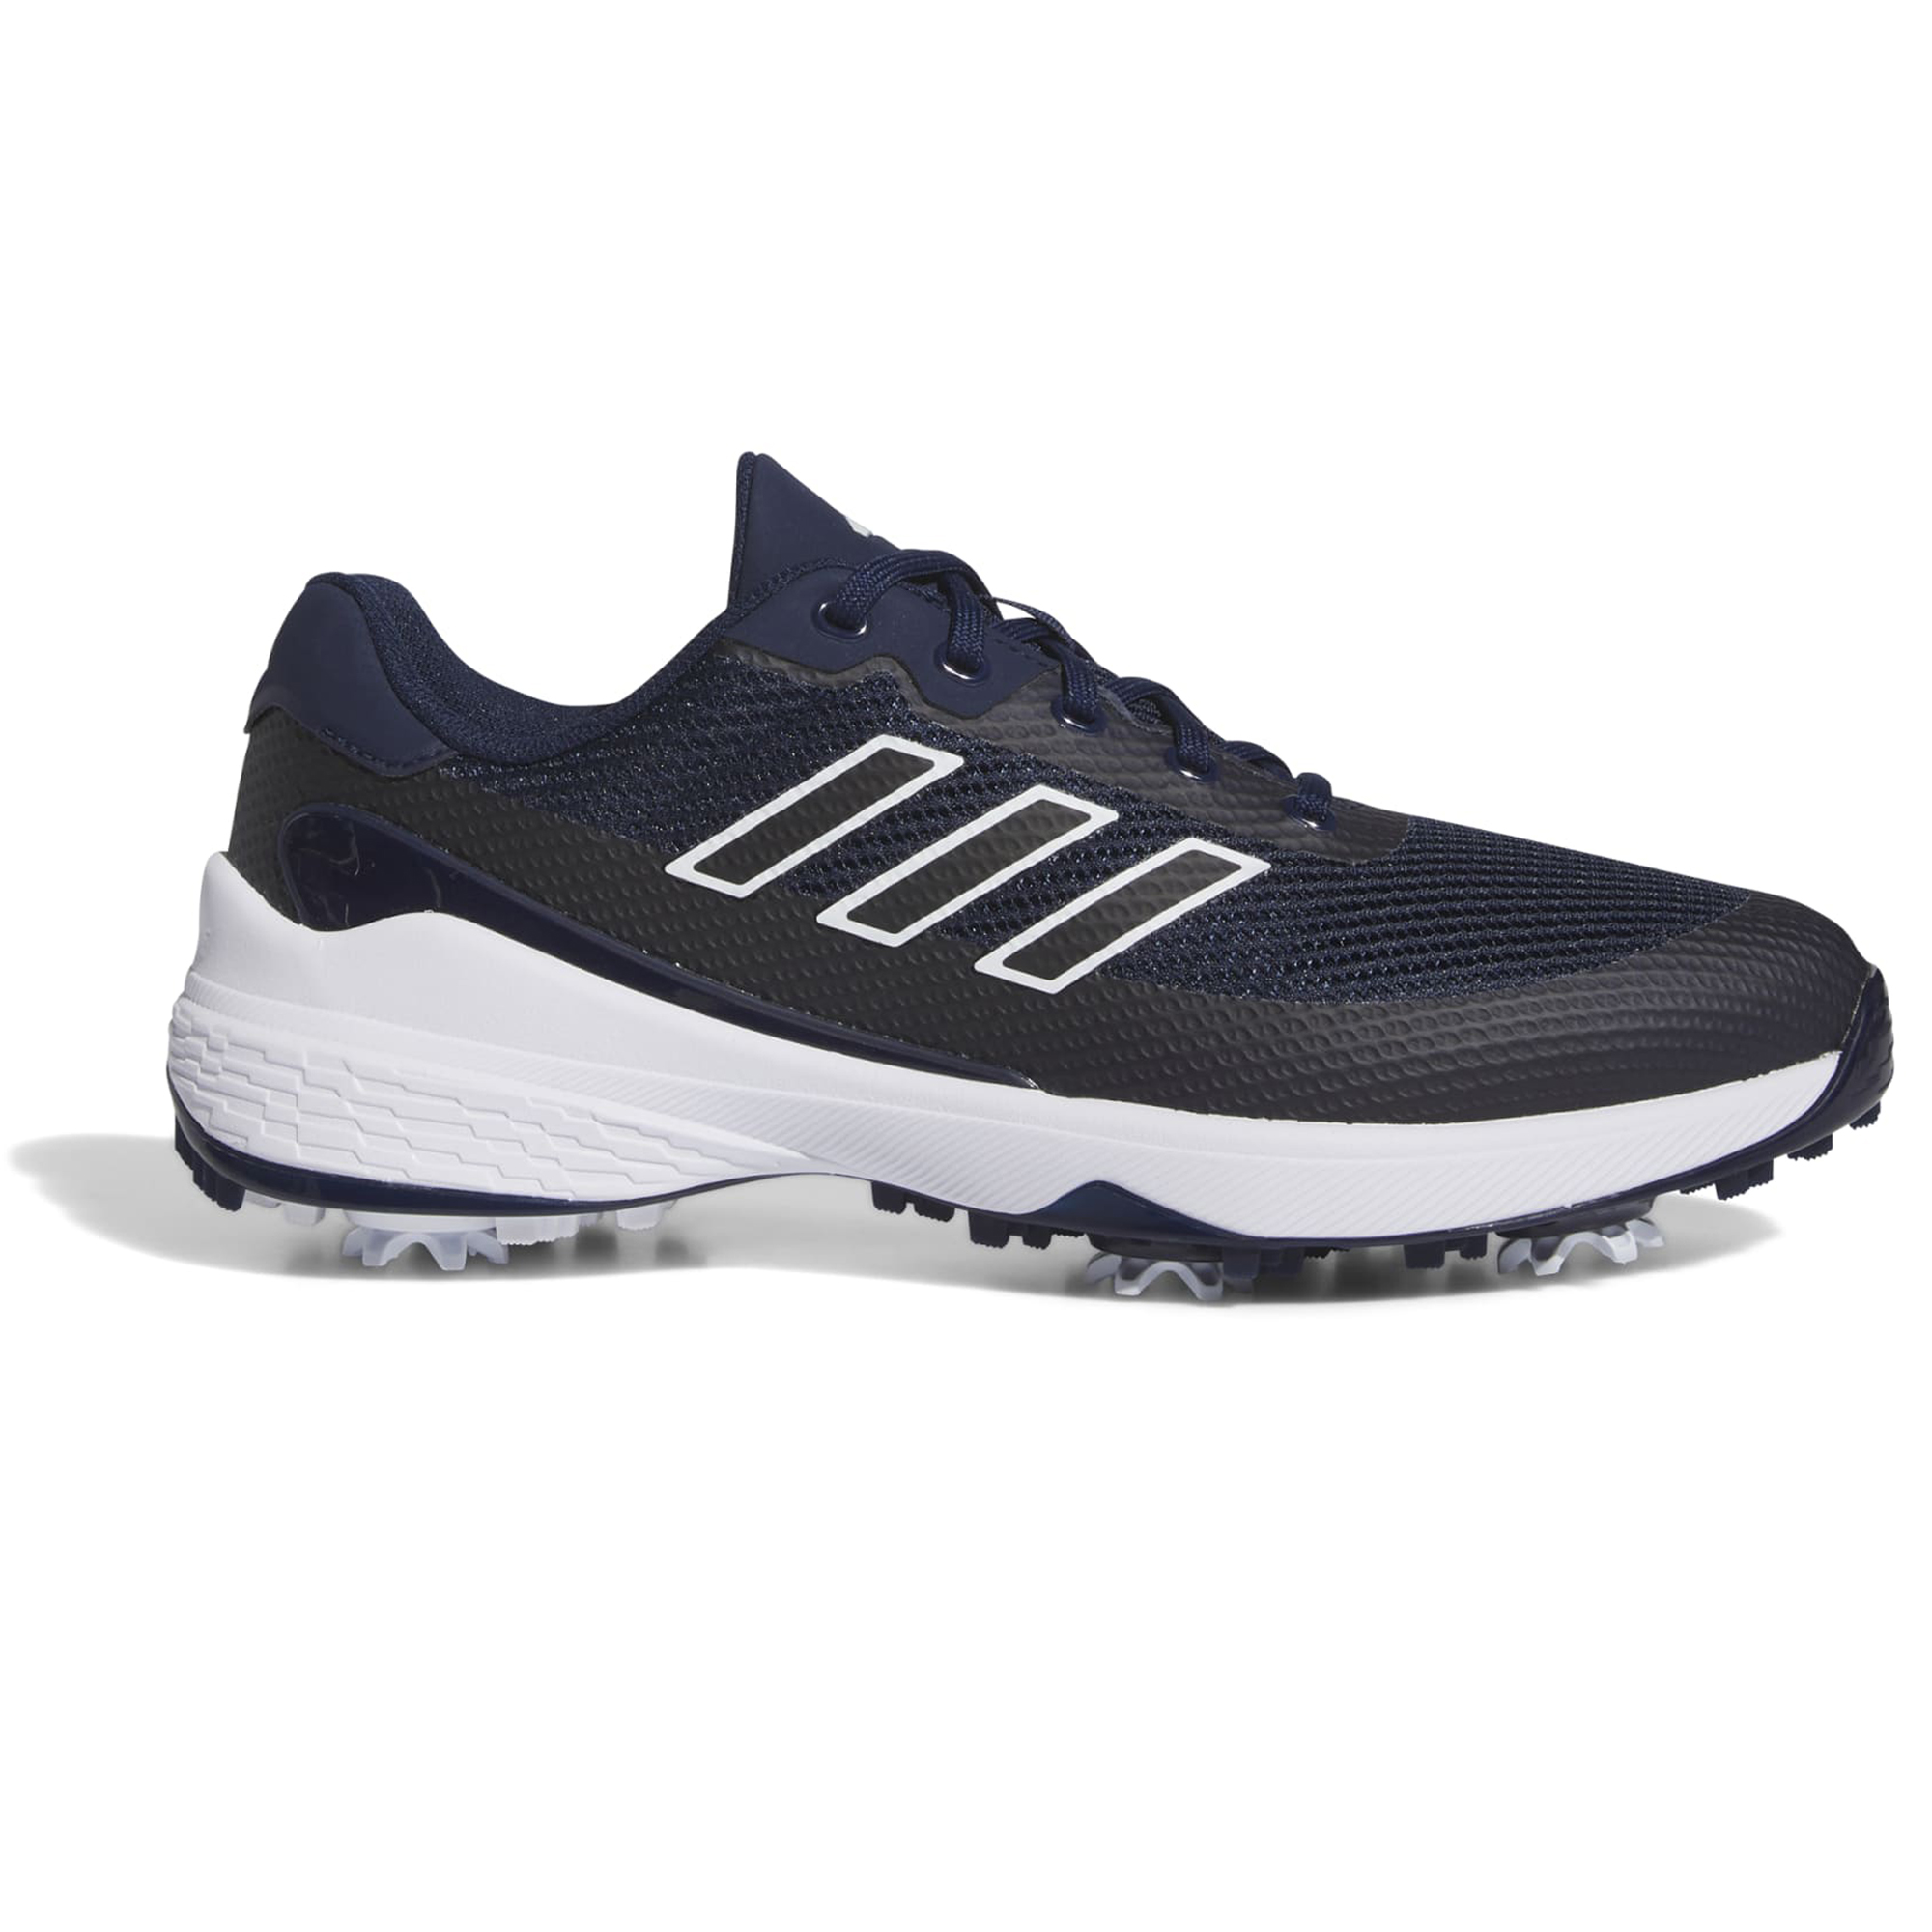 adidas ZG23 Vent Mens Spiked Golf Shoes  - Collegiate Navy/Cloud White